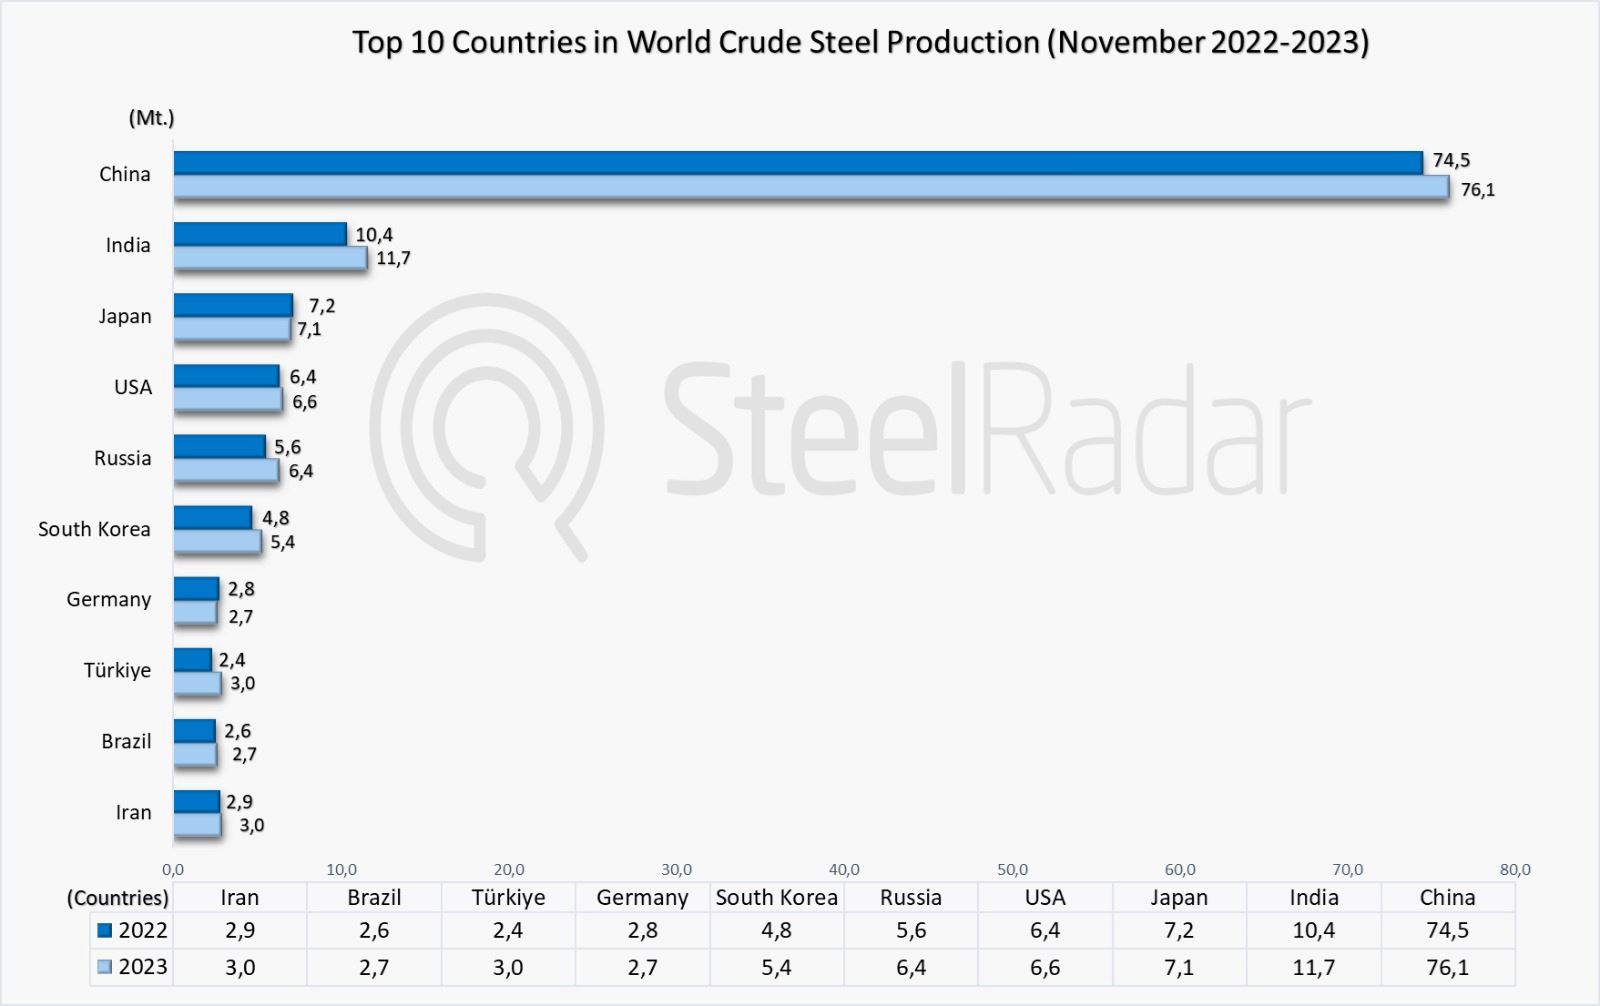 World crude steel production increased by 3.3% in November